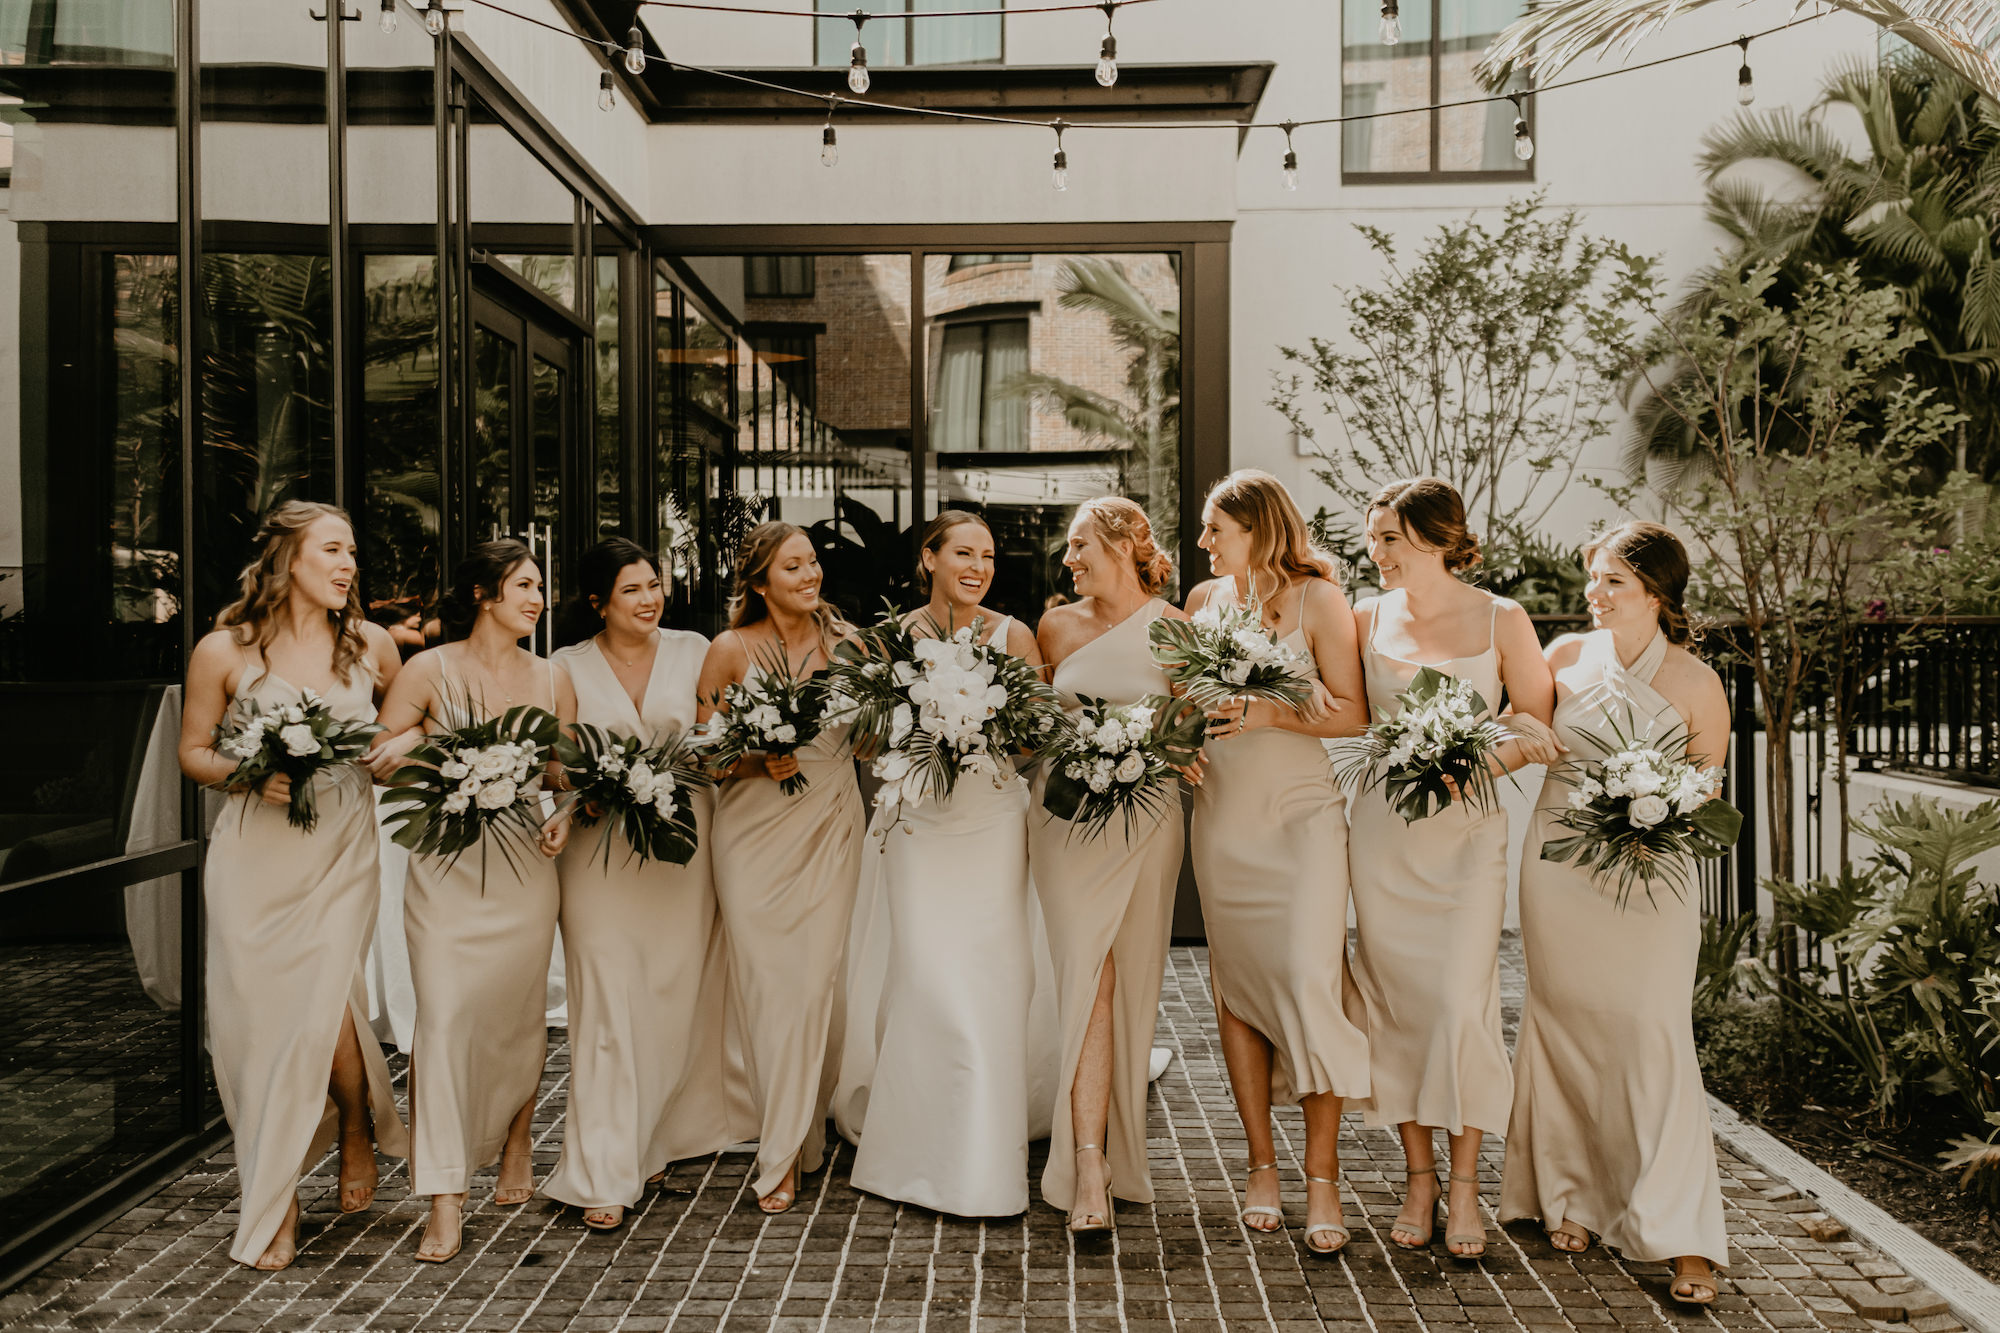 Mismatched Bridesmaids Neutral Champagne Wedding Dresses | Modern Tropical Bridal Party Wedding Inspiration | White Roses and Tropical Greenery Bouquets | Tampa Bay Florist Monarch Events and Design